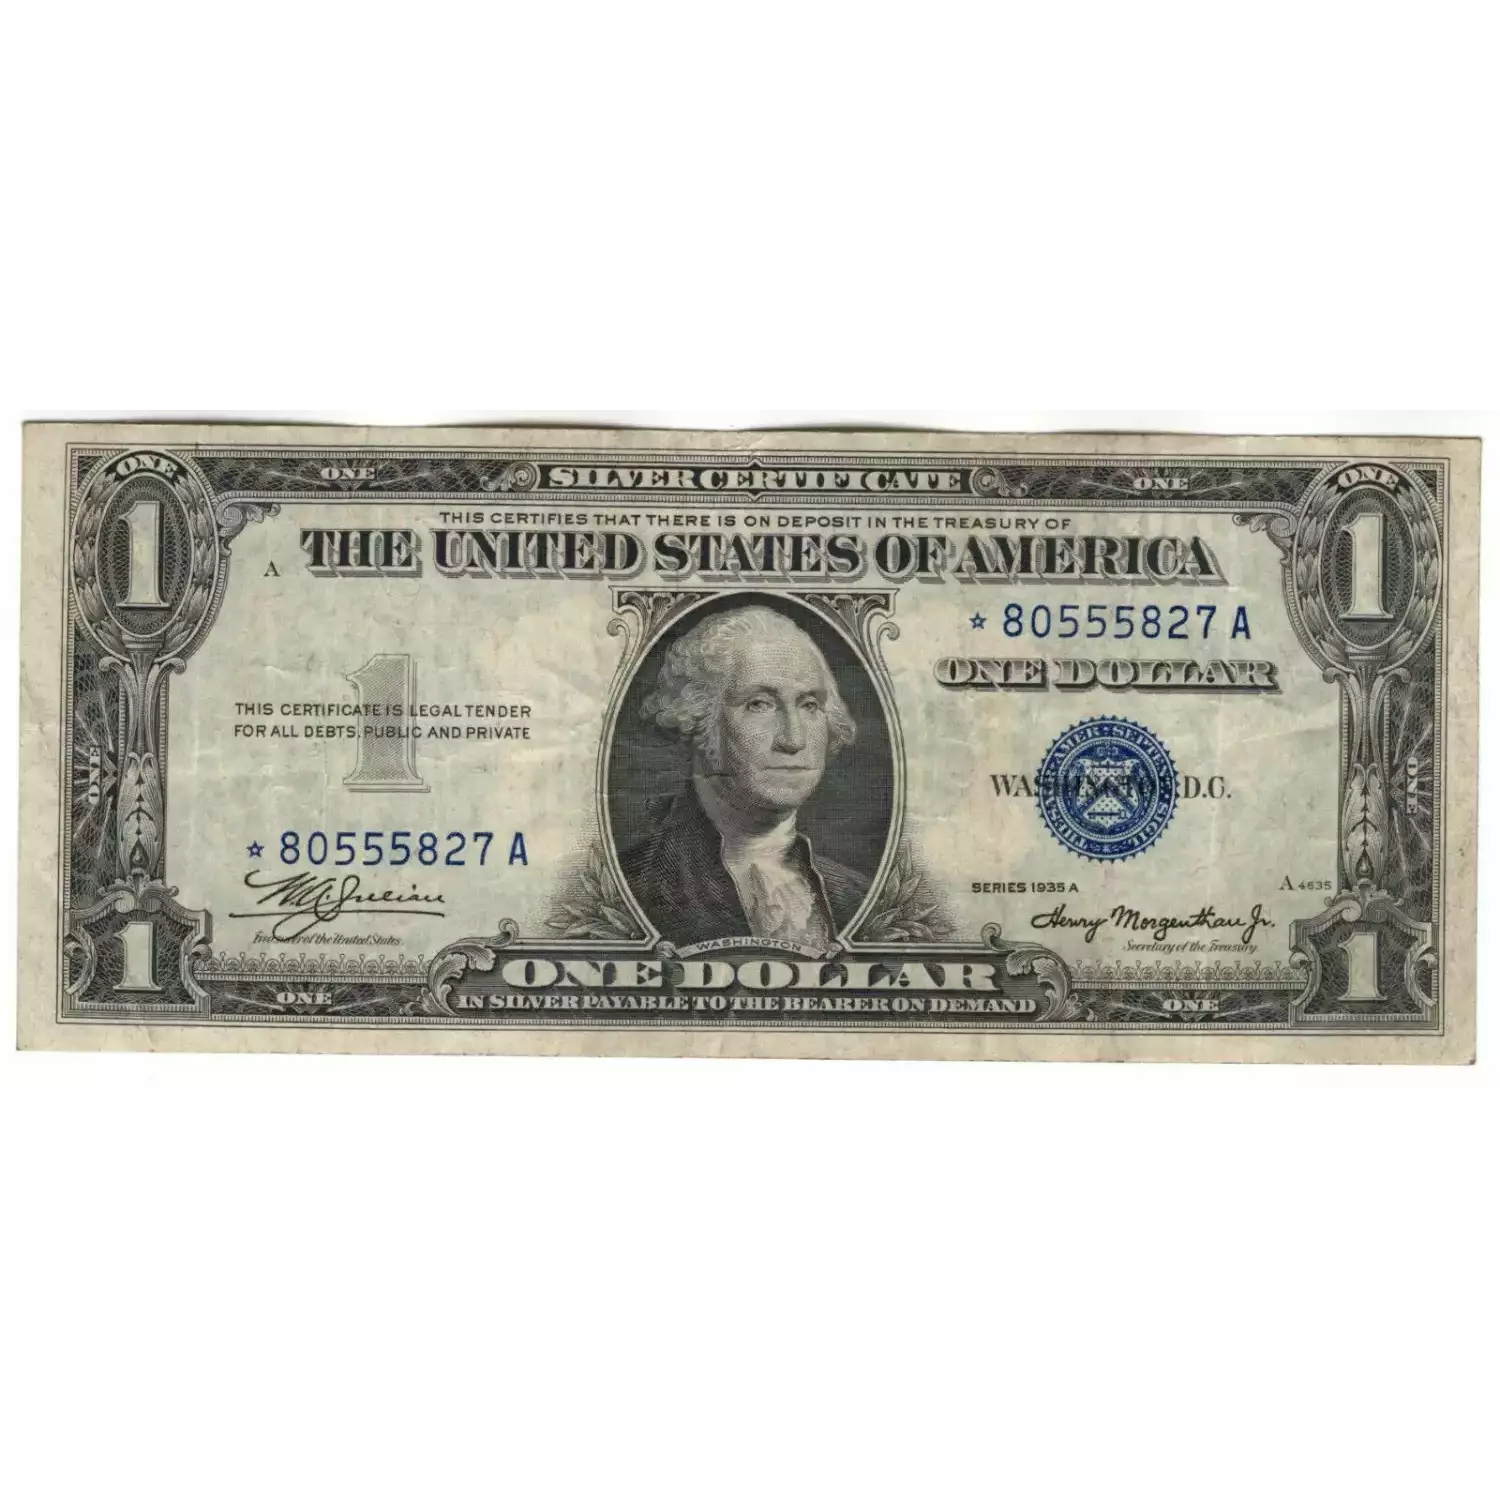 $1 1935-A blue seal. Small Silver Certificates 1608*